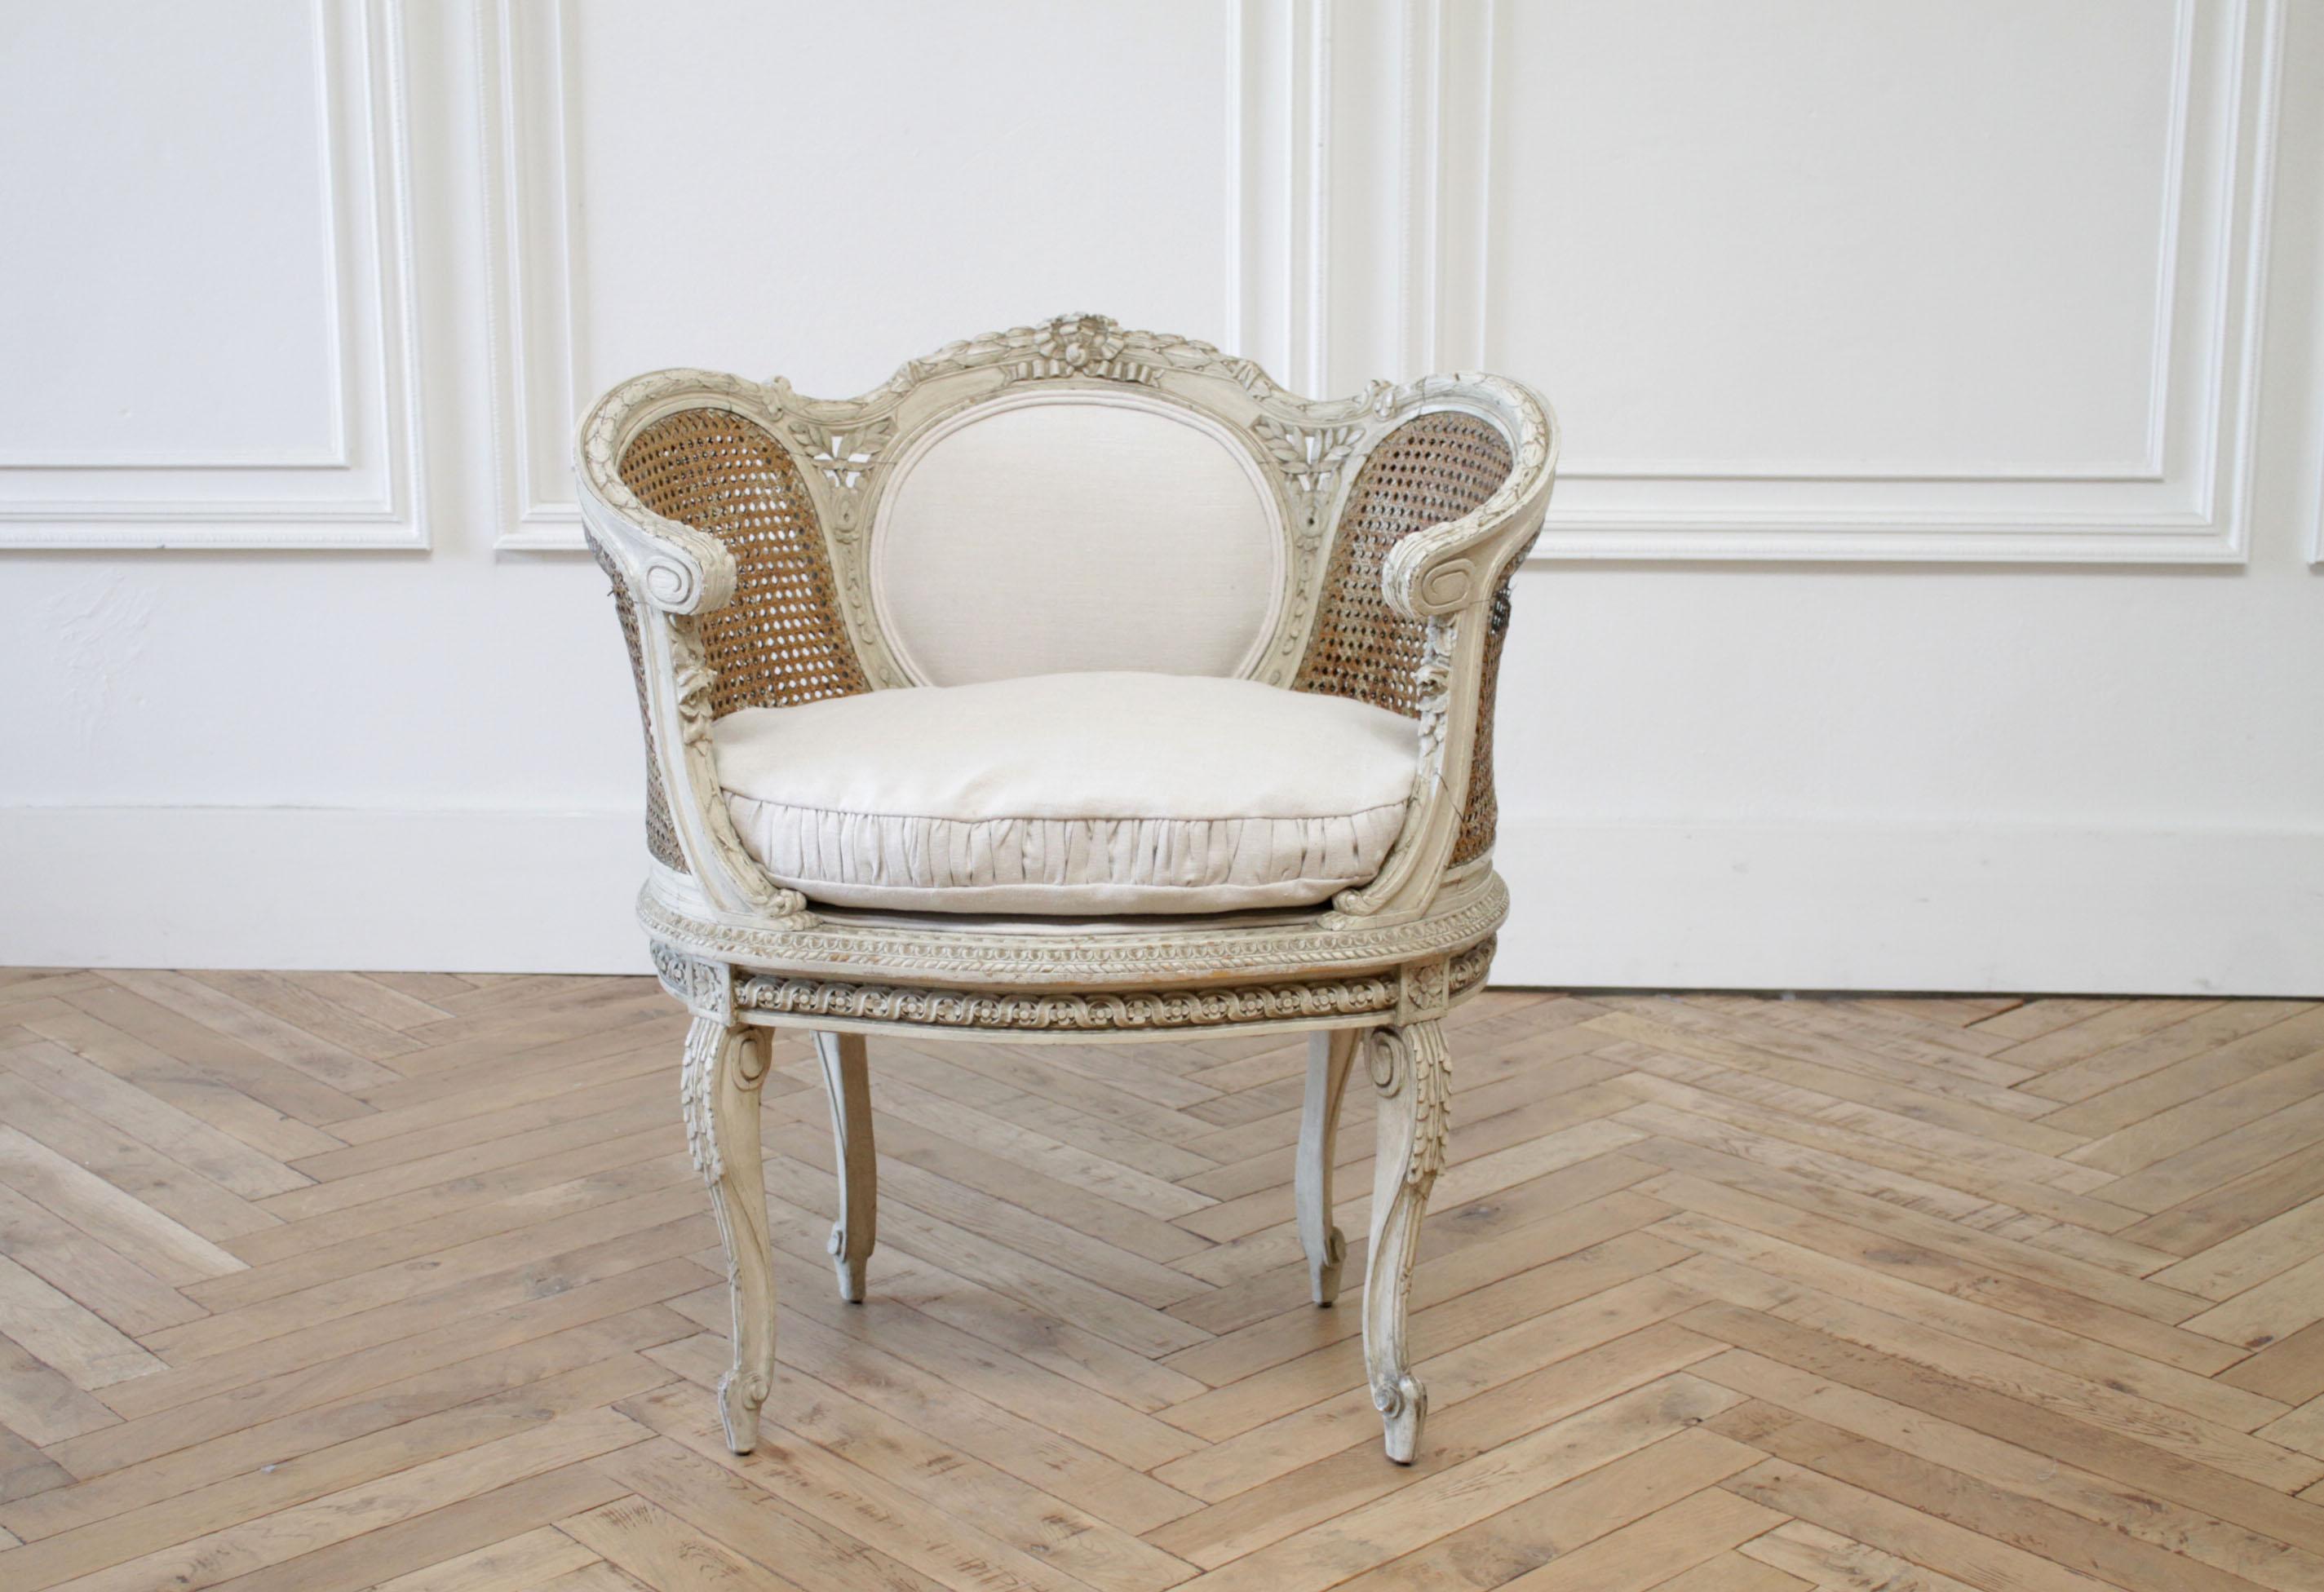 19th century painted French cane chair with linen slip cover cushion
Original painted finish, beautiful antique patina, this 19th century French chair has been reupholstered in our bone linen. The seat cushion is slip covered, with a cinched box to